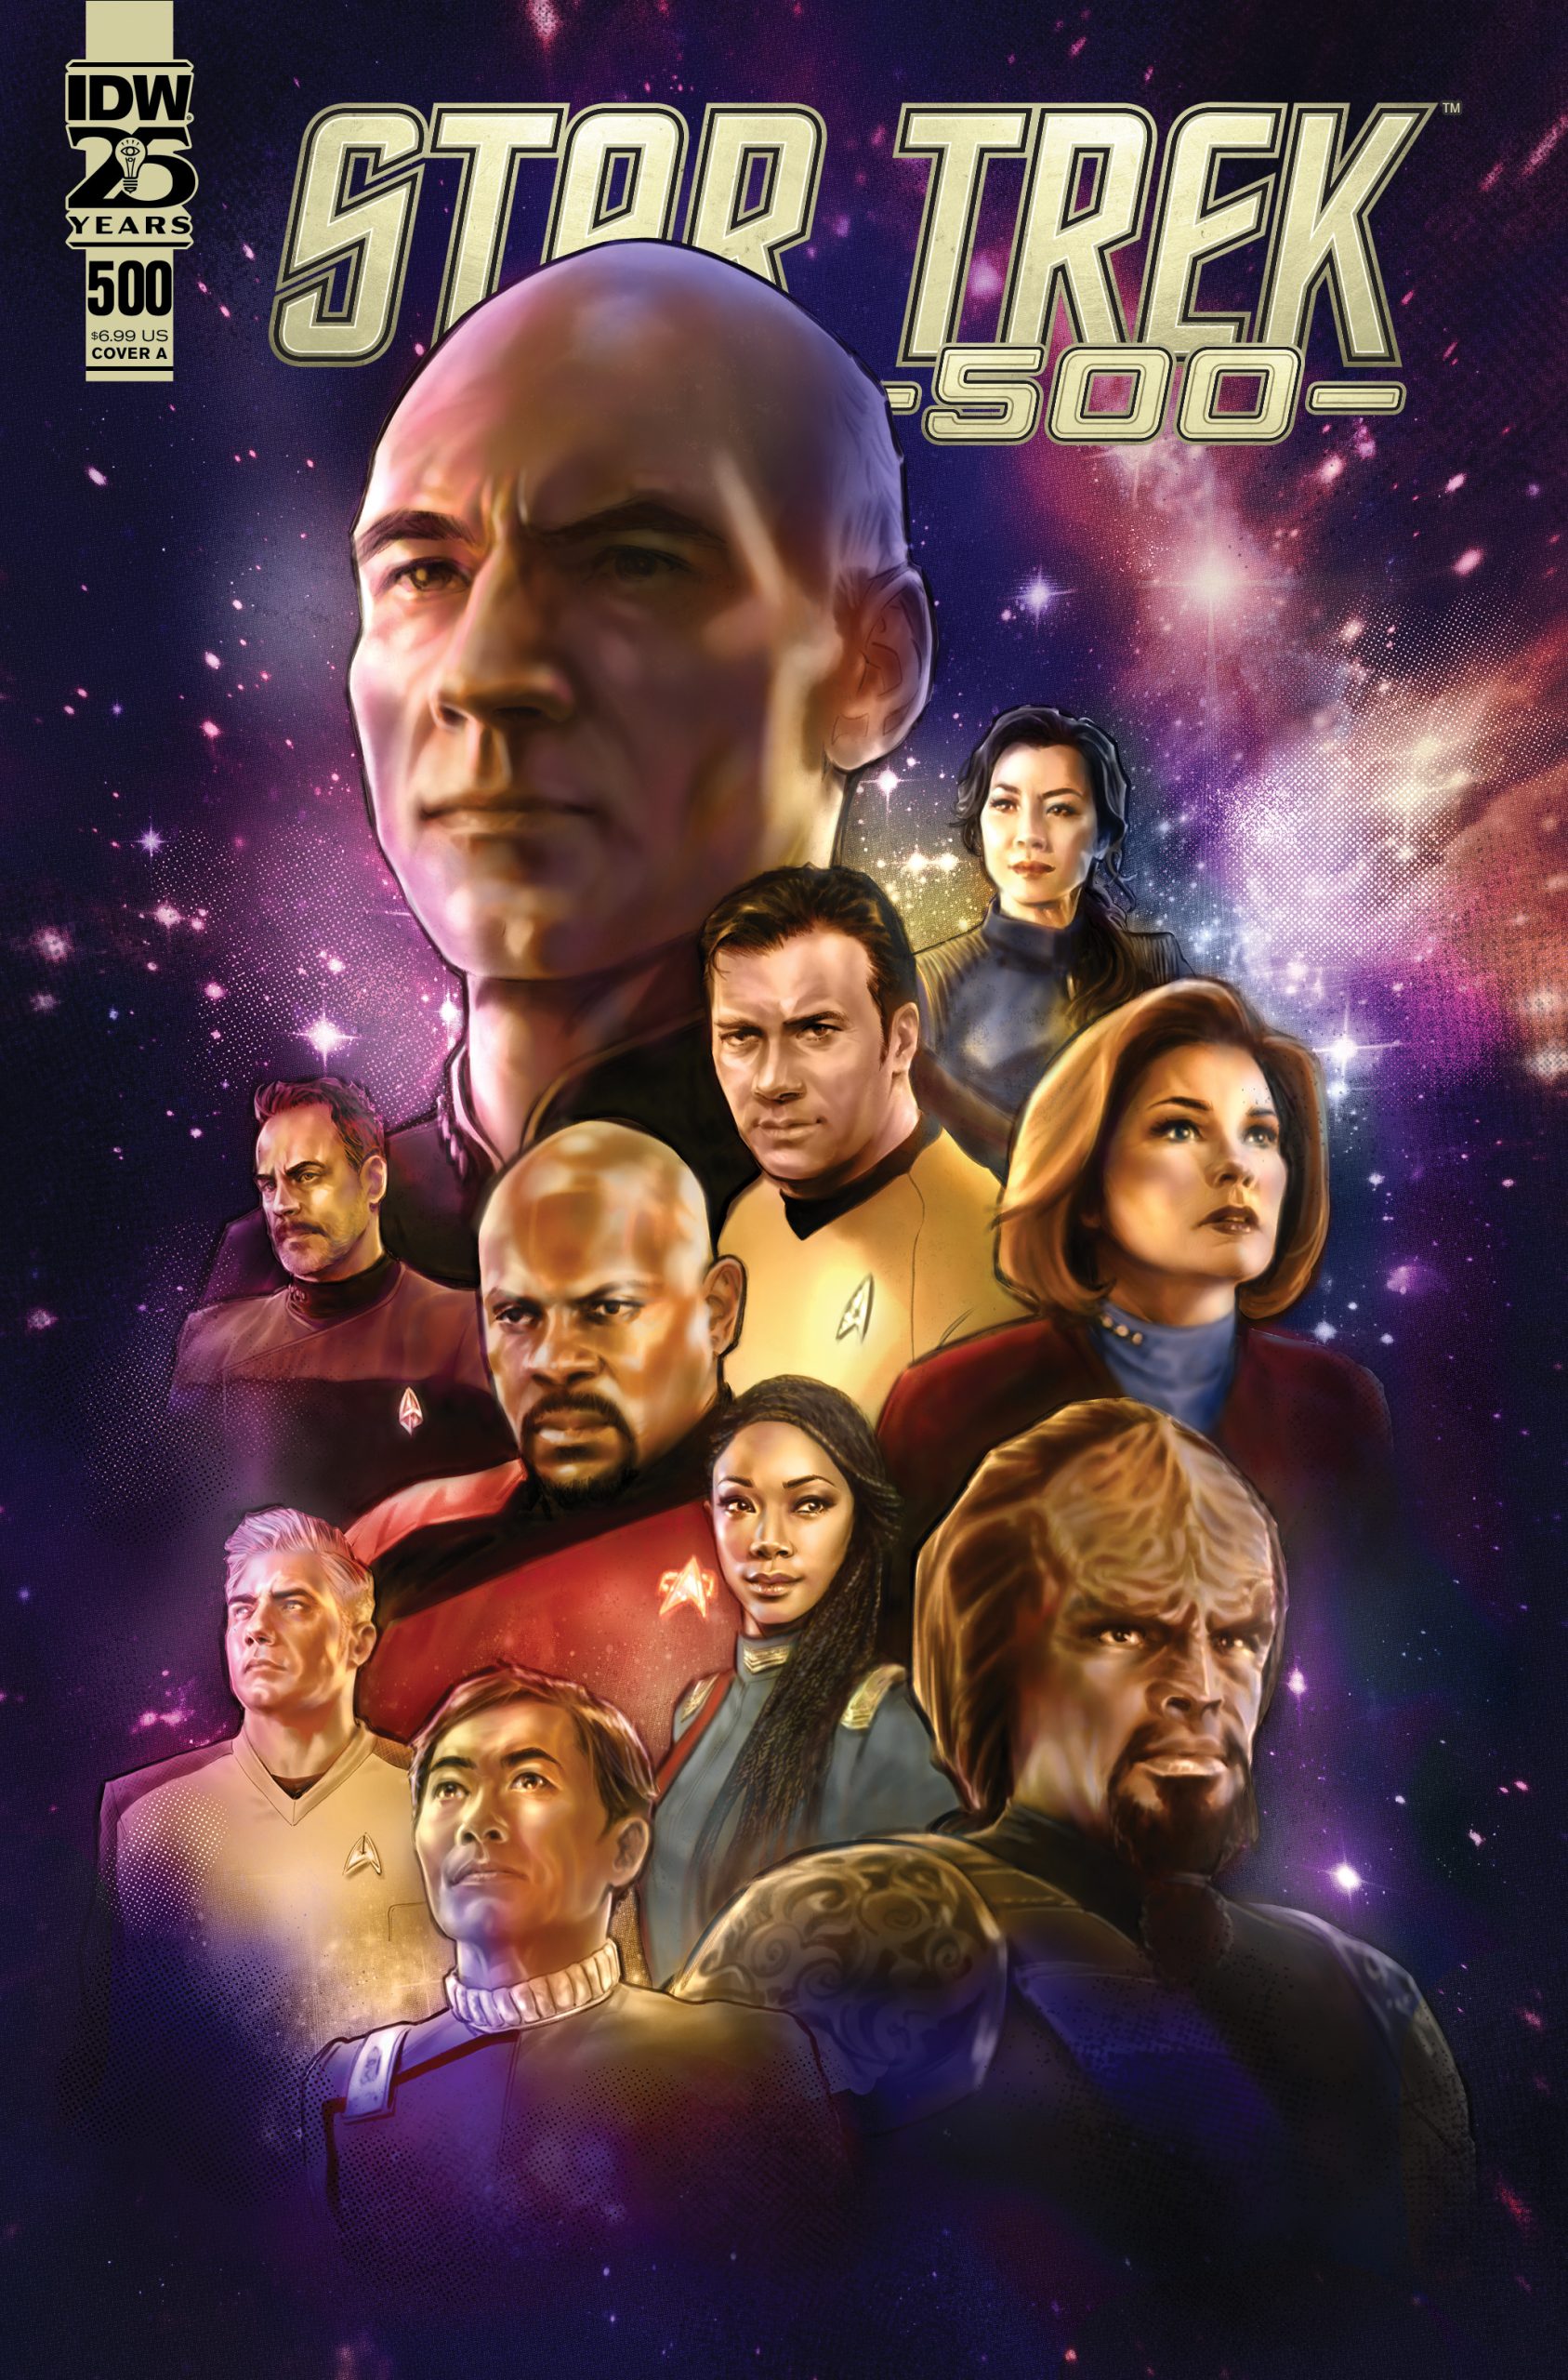 Signature Series: Star Trek #500 3 Cover Set signed by 7 writers including Patton Oswalt, Jackson Lanzing, Collin Kelly & more…